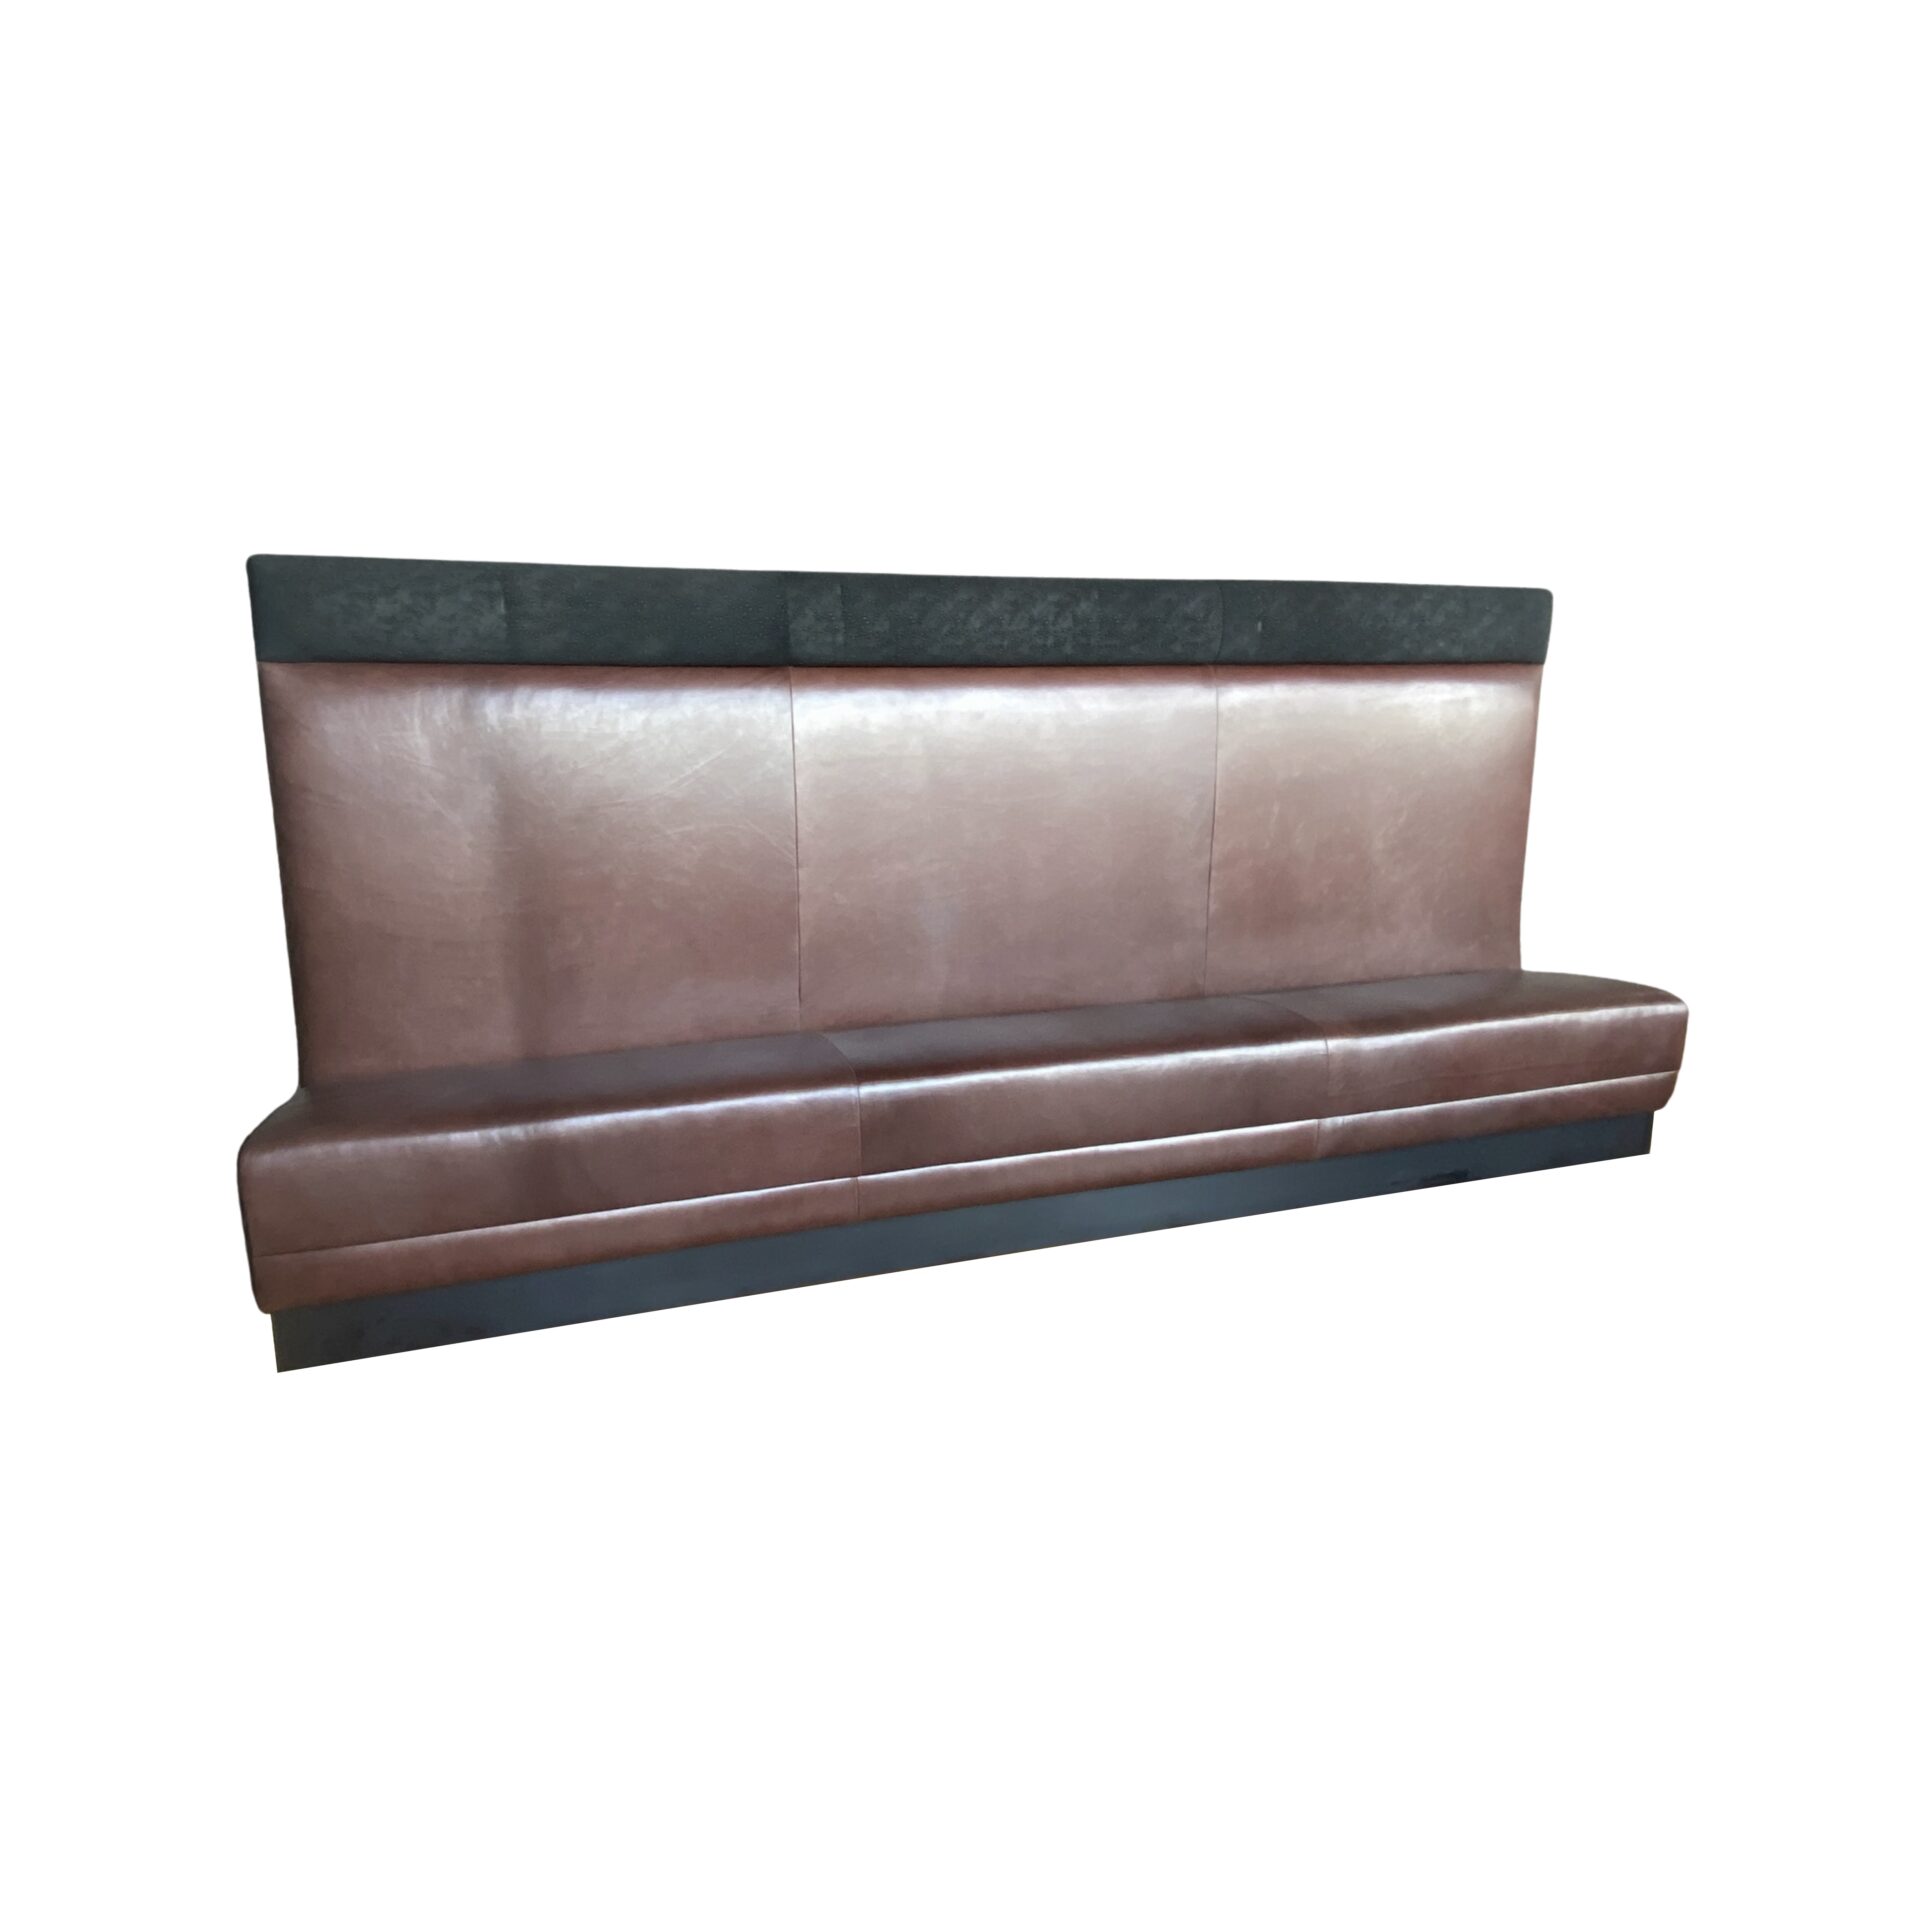 DAMON-upholstered-booth-luxury-furniture-blend-home-furnishings